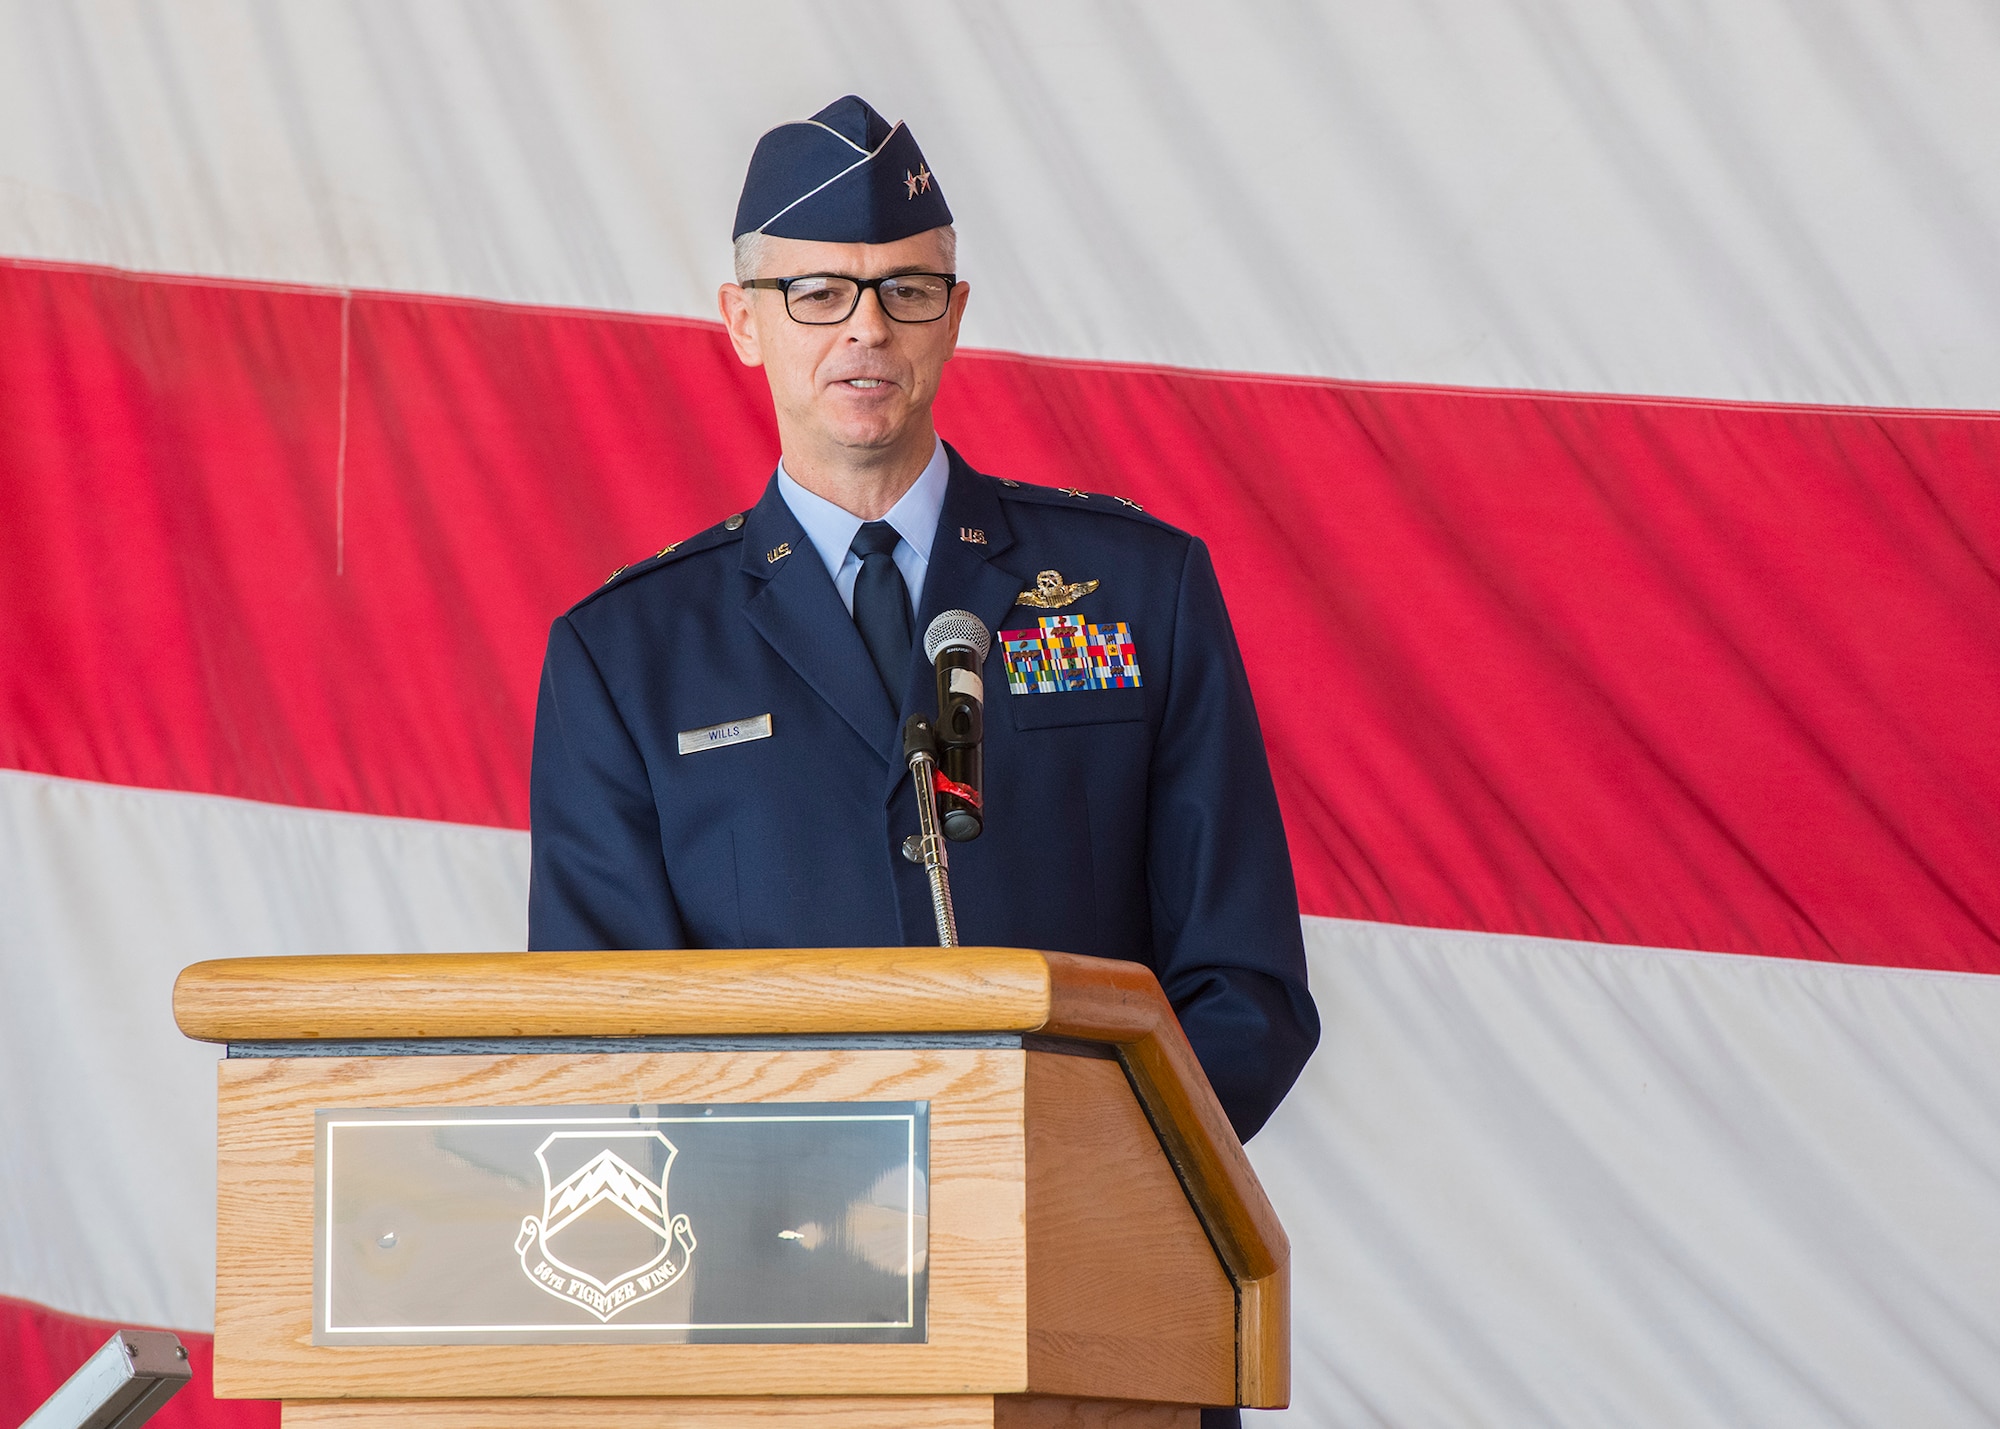 Maj. Gen. Craig Wills, 19th Air Force commander, Joint Base San Antonio-Randolph, Texas, delivers a speech during the 56th Fighter Wing Change of Command ceremony, May 27, 2020, at Luke Air Force Base, Ariz.